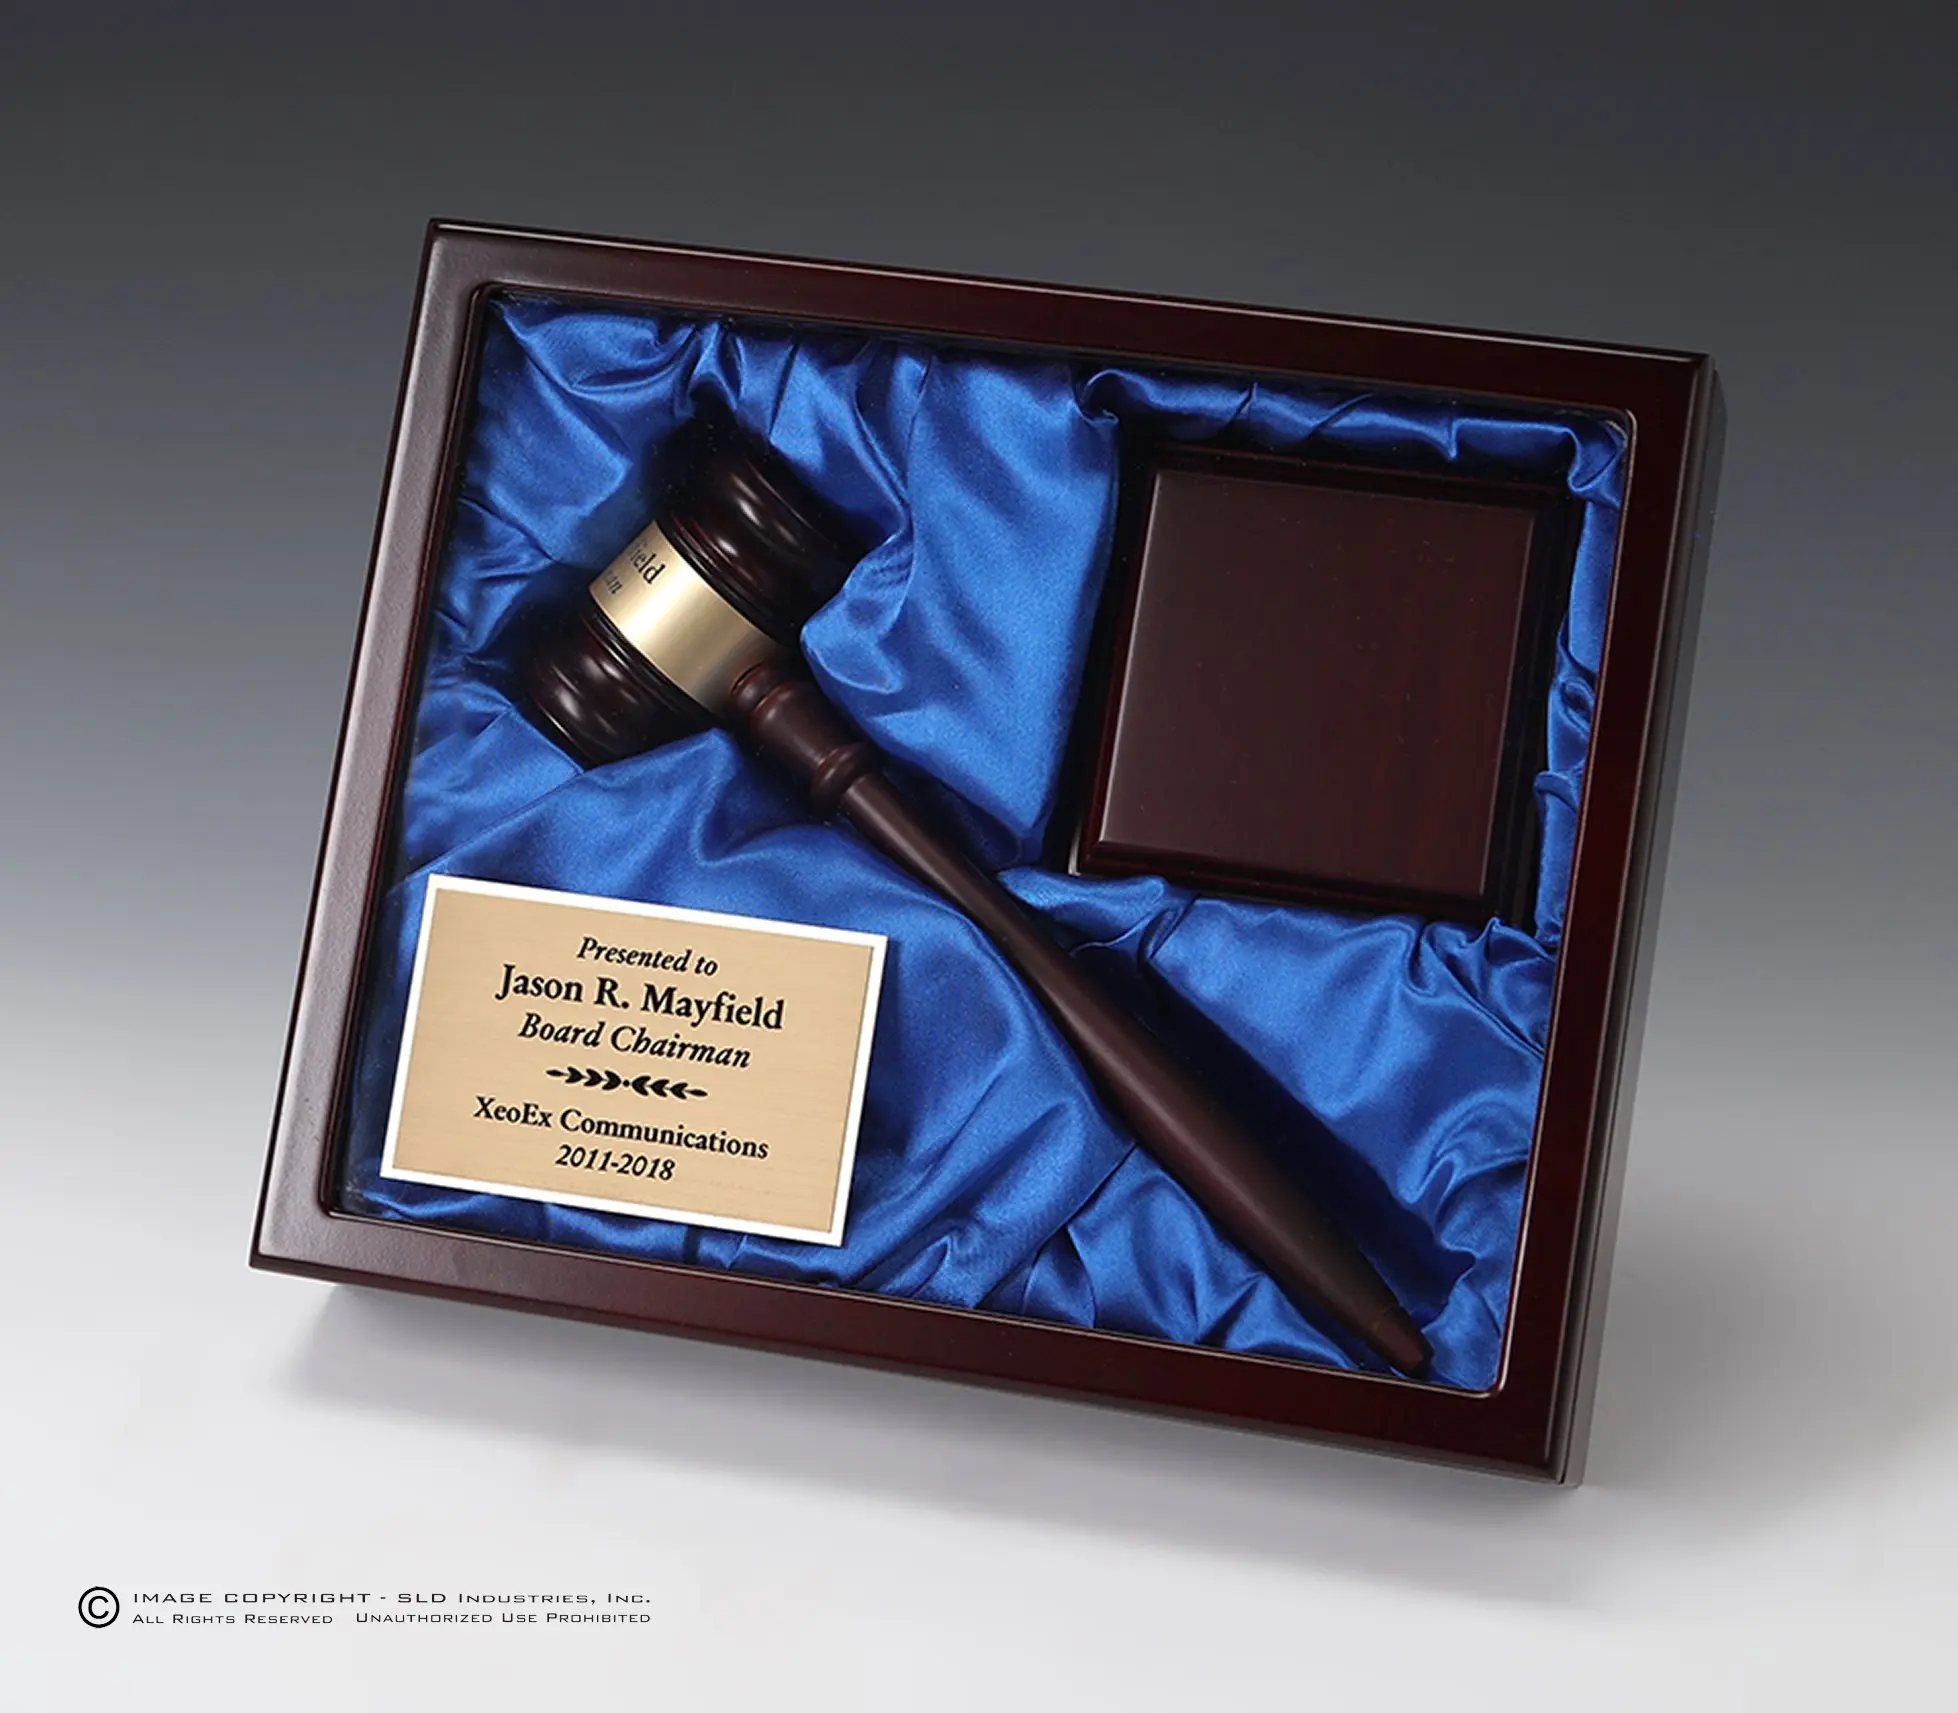 FP Auction Hammer for Court Judge or Auction Sale#PMC Wood Gavel and Round Block Set